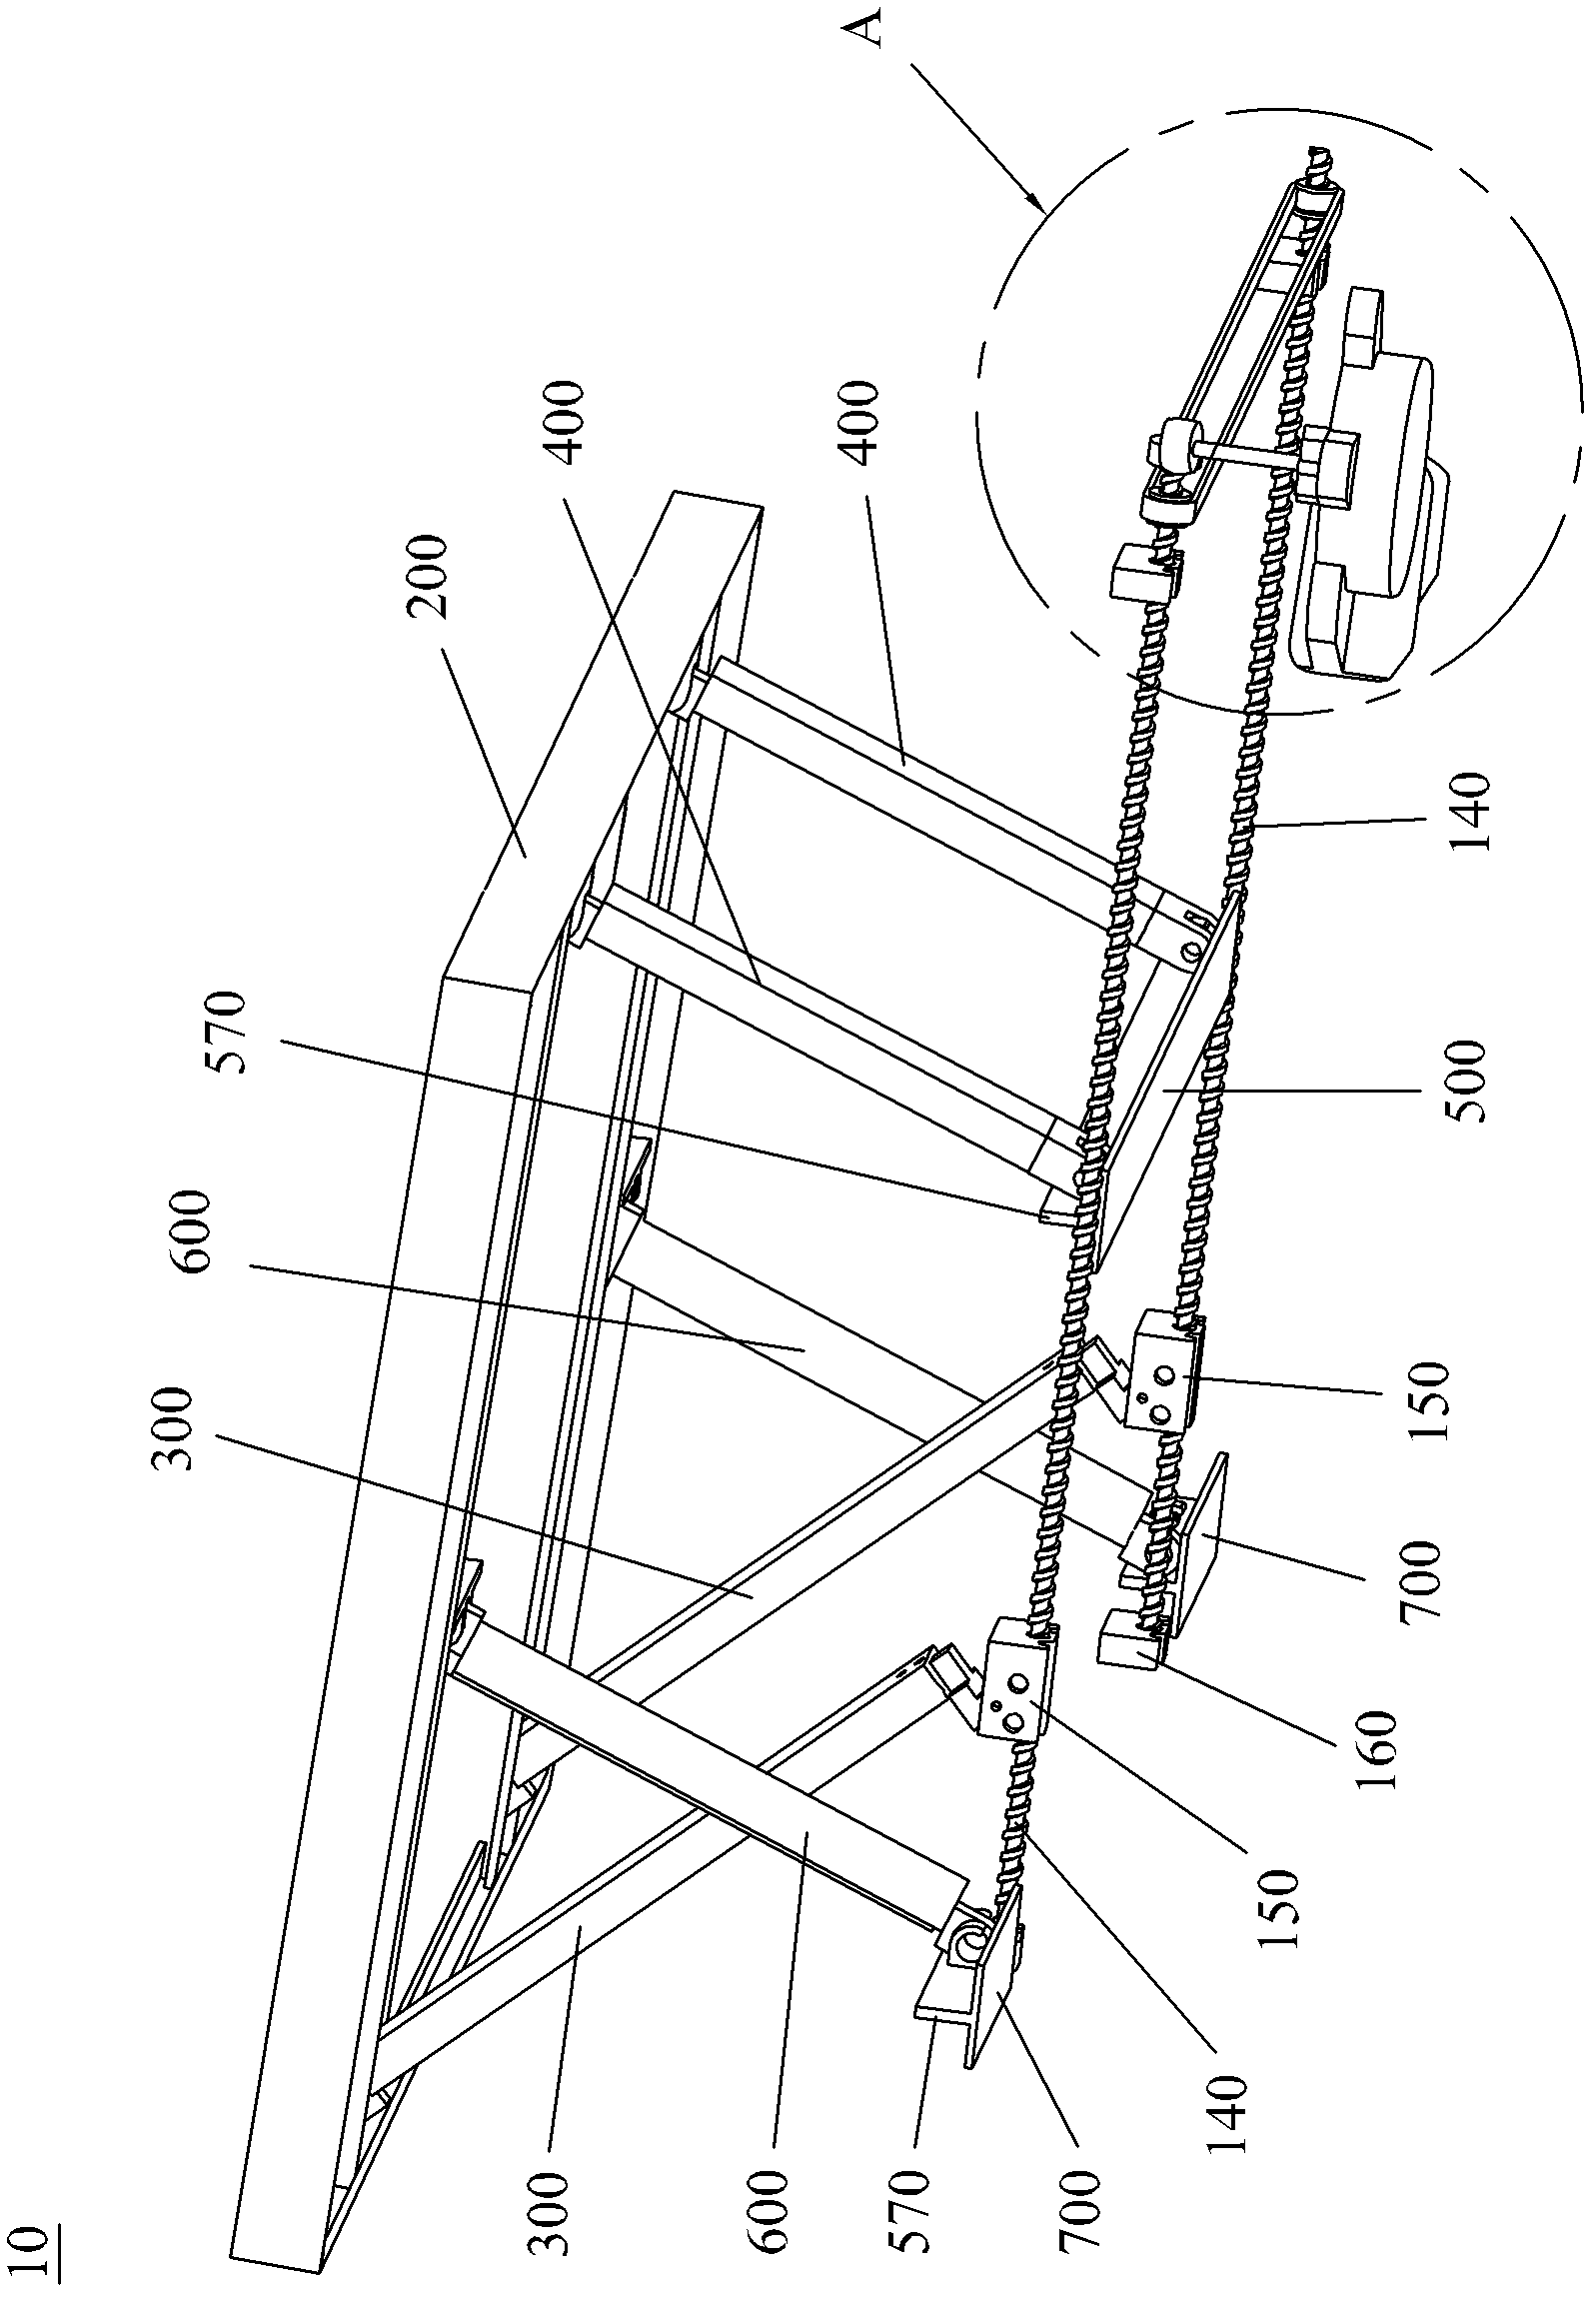 Lifting desktop device and display integrated desk with same